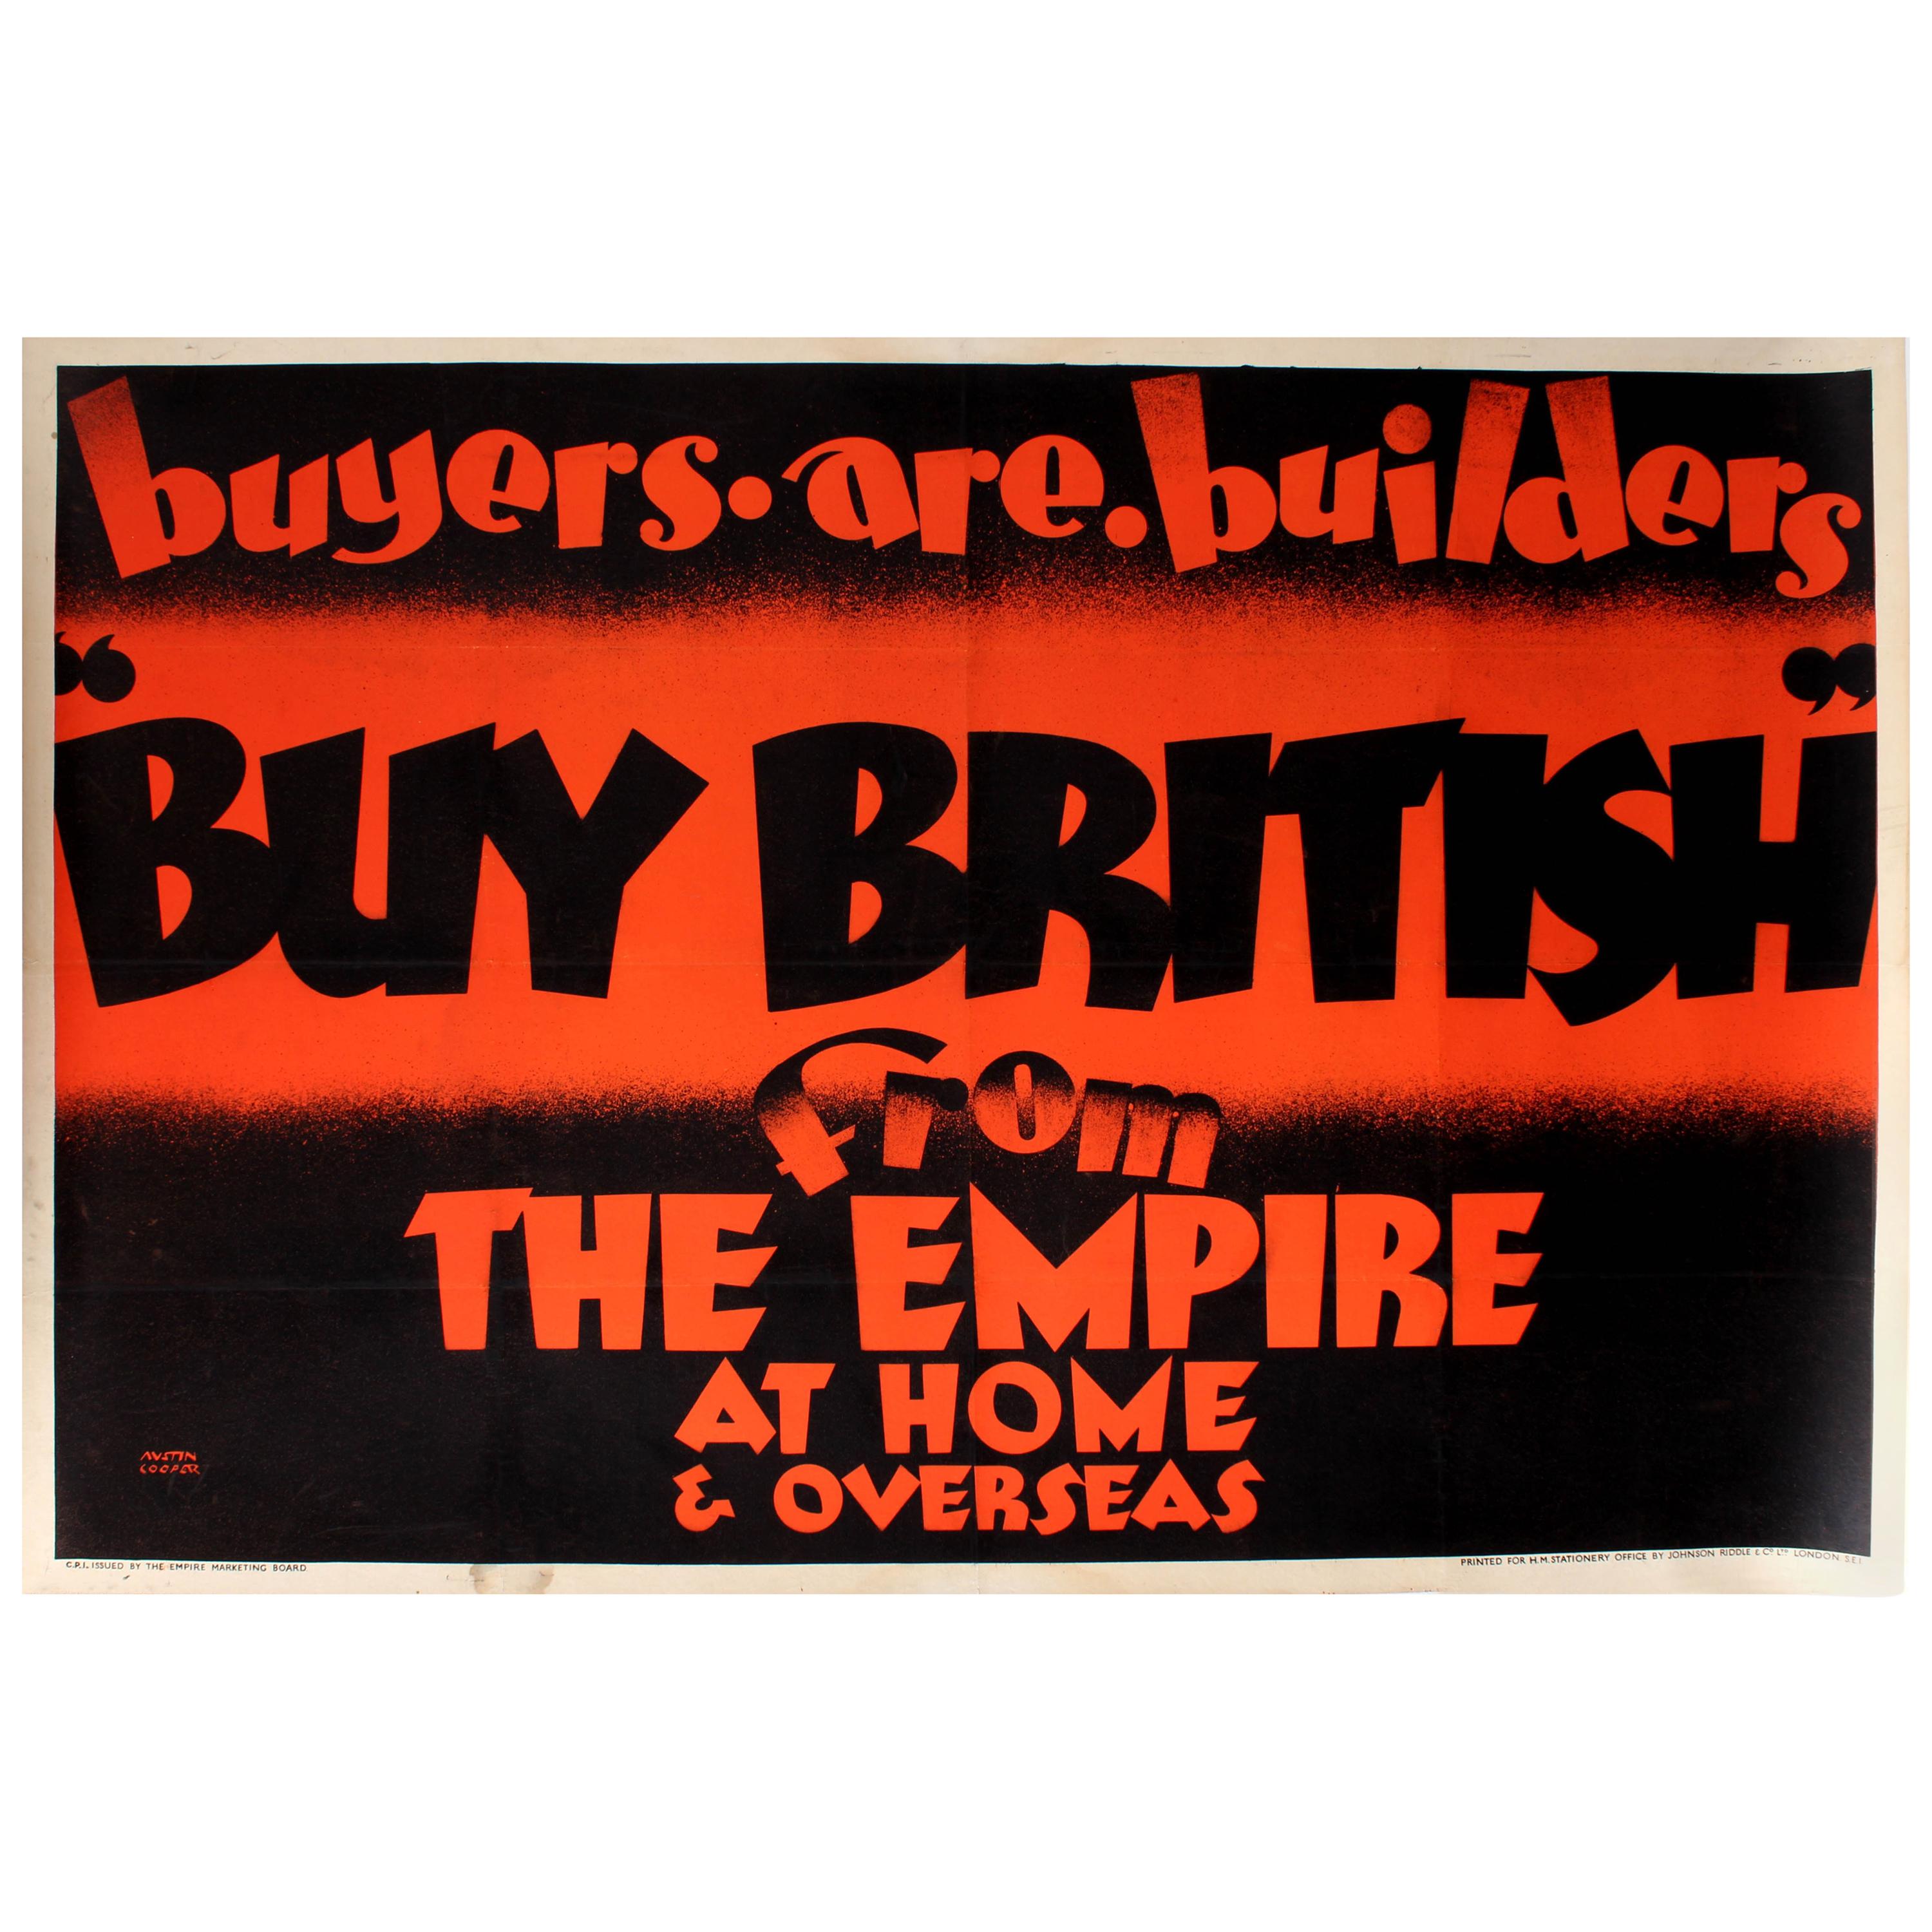 Large Original Vintage Empire Marketing Board Poster Buy British from the Empire For Sale